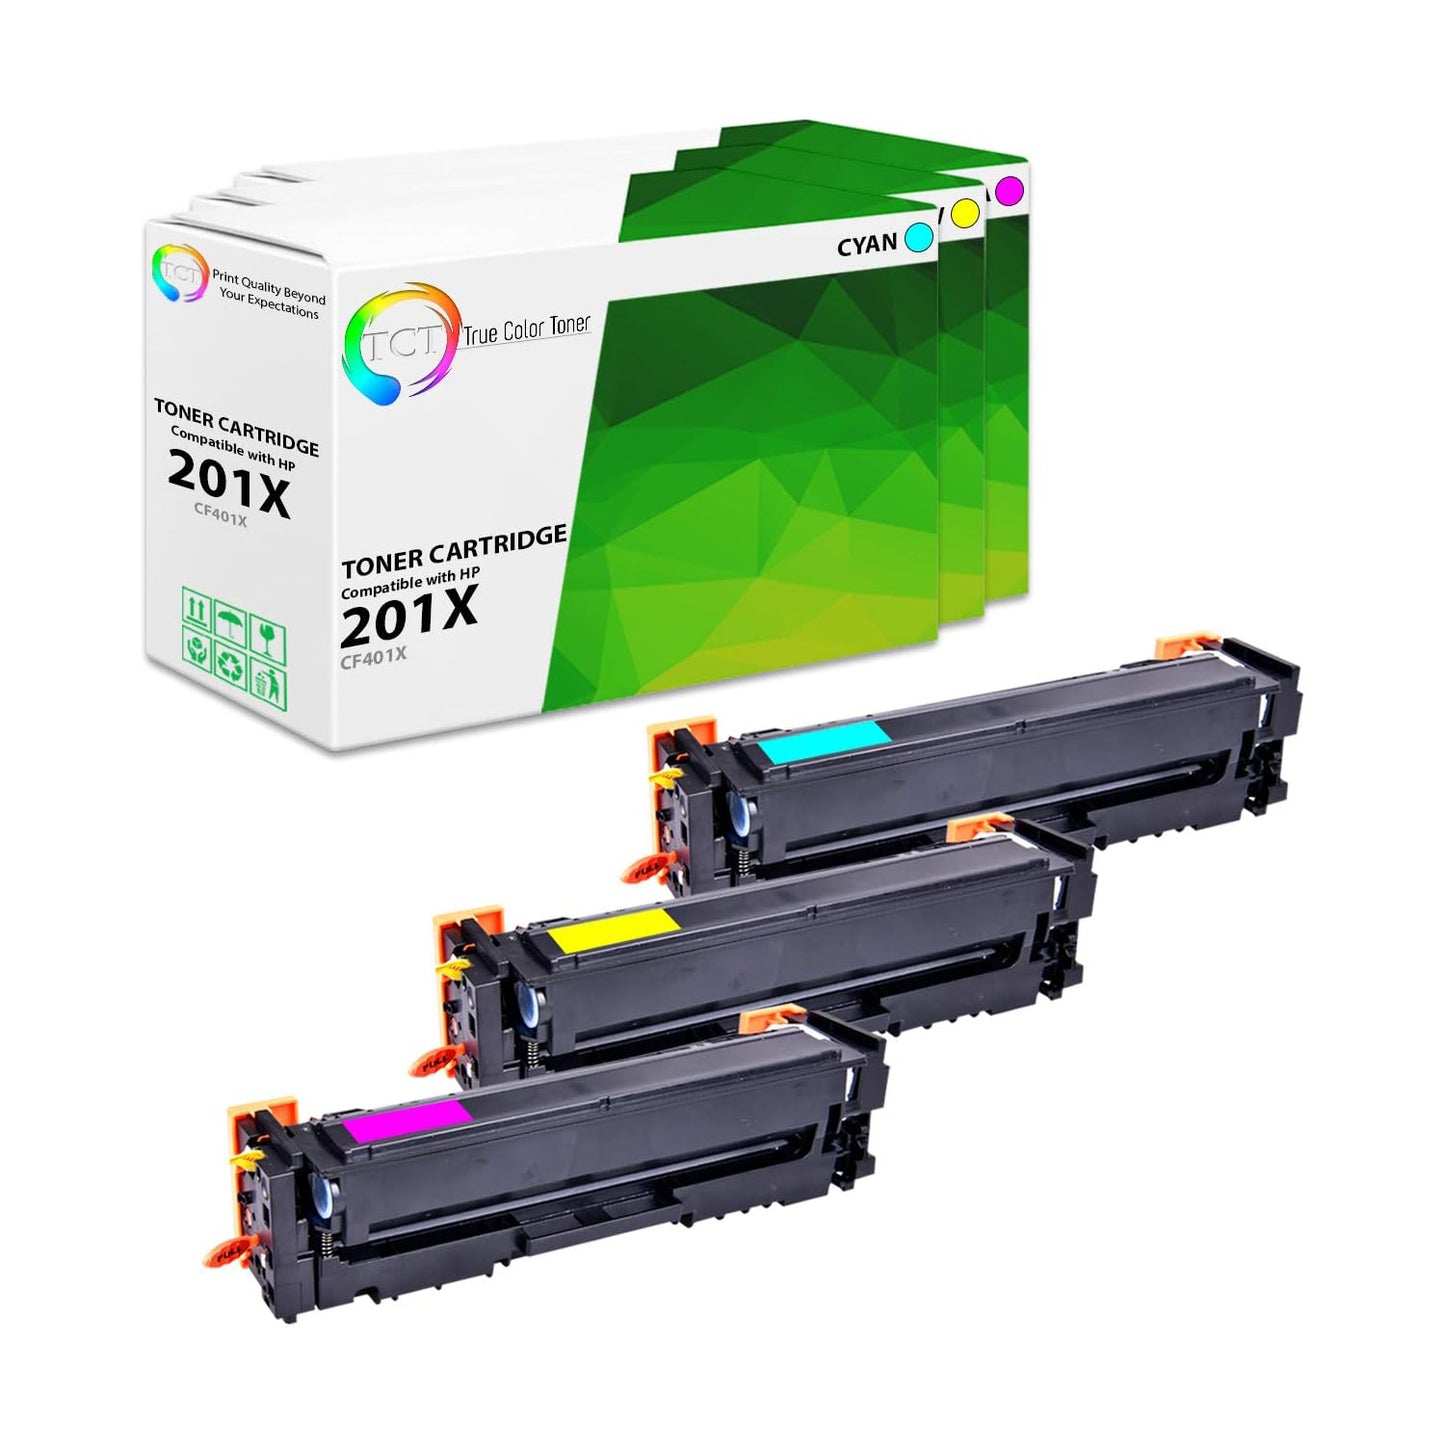 TCT Compatible High Yield Toner Cartridge Replacement for the HP 201X Series - 3 Pack (C, M, Y)